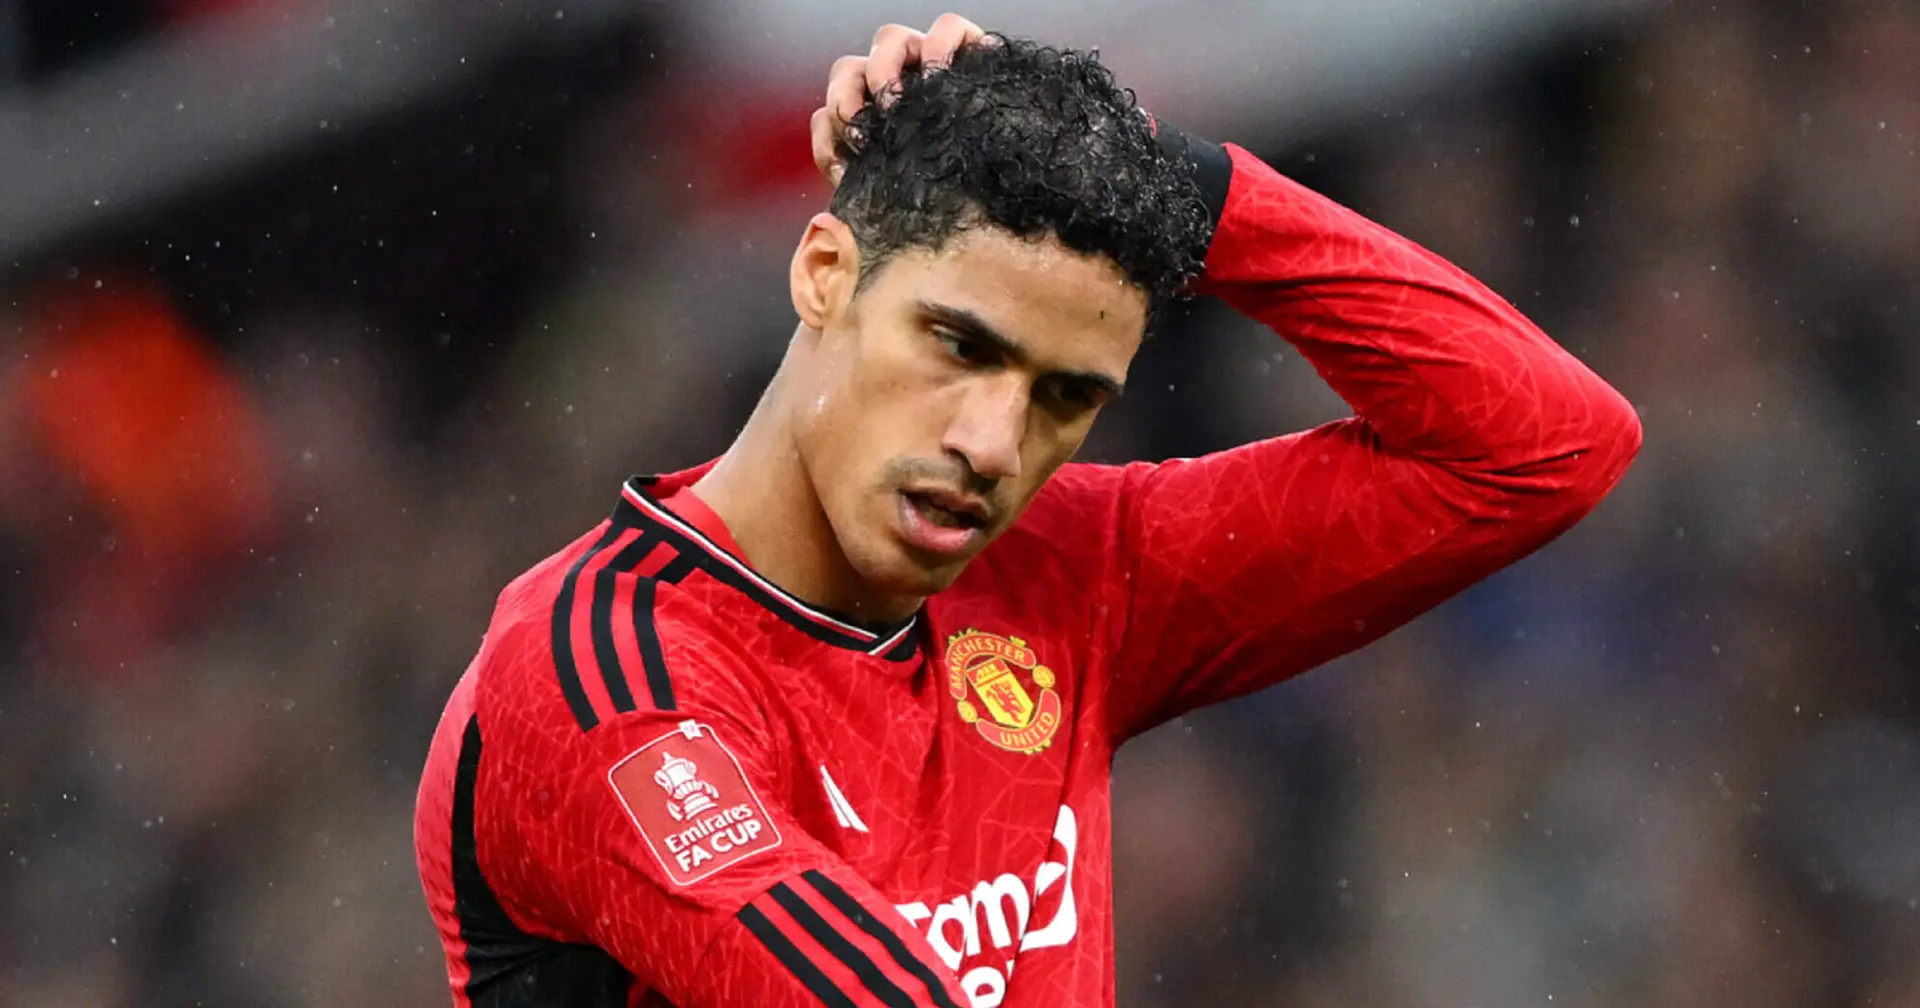 'Robbed of a genuinely classy player': Man United fans react to Raphael Varane's exit